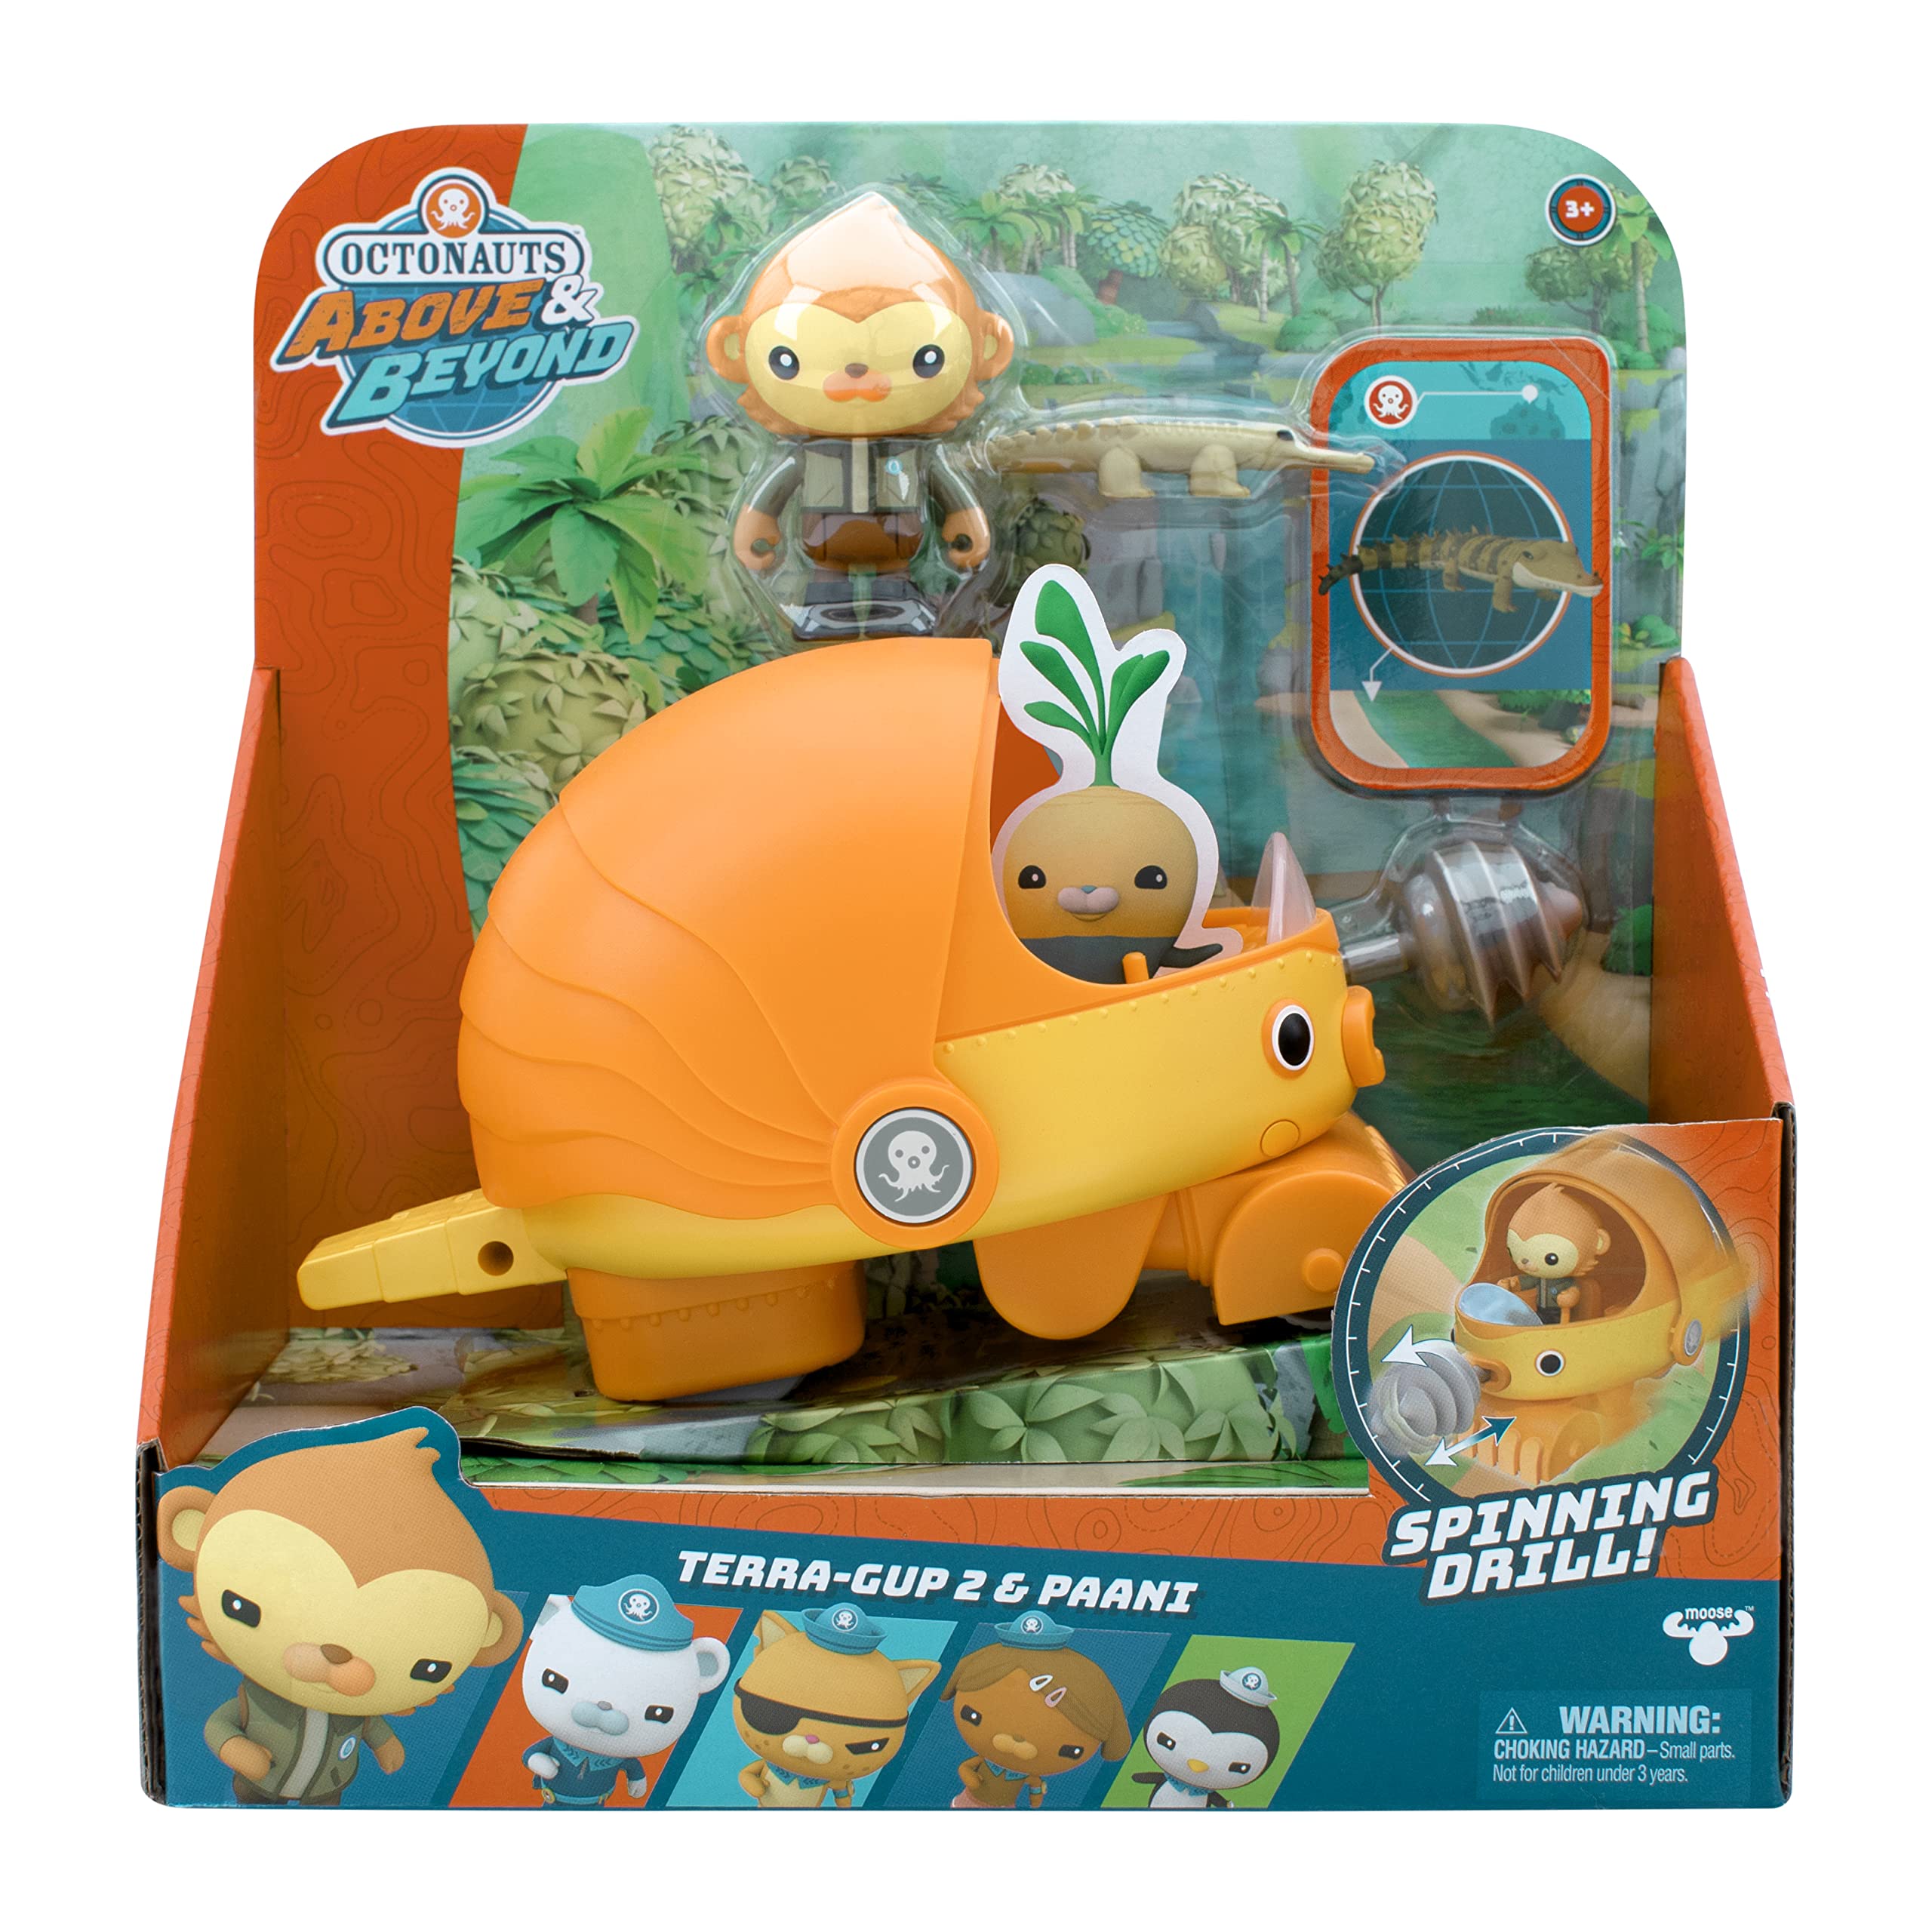 Are These The Best Octonauts Toys: Discover the Top Gup X Playsets